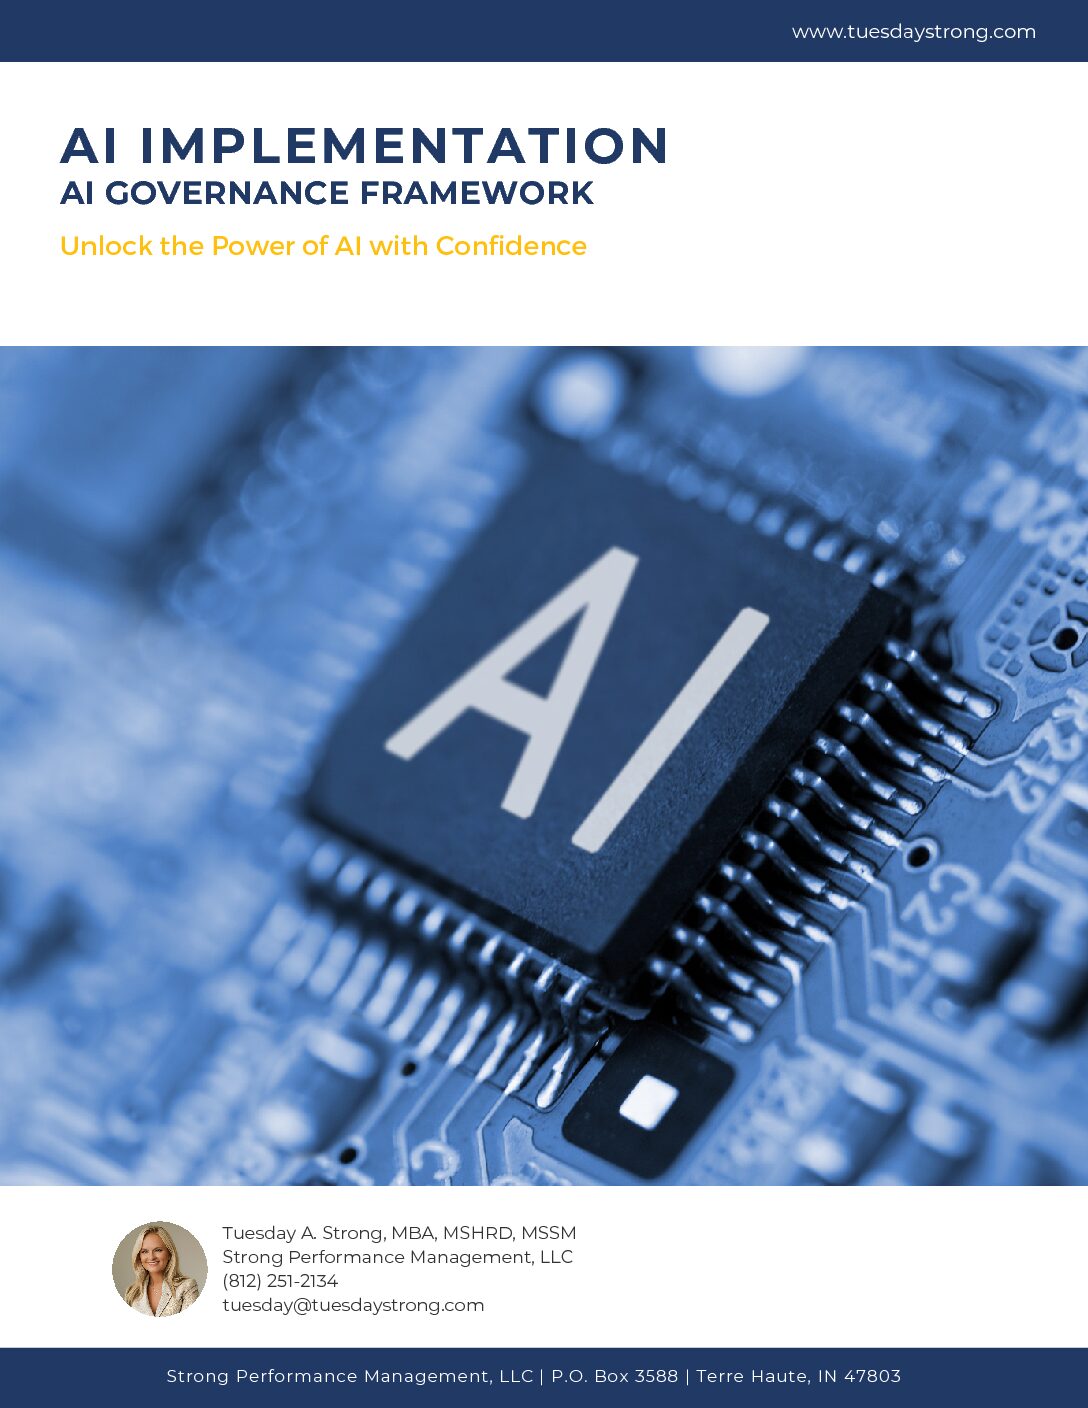 AI Implementation - AI Governance Framework Guide and Template